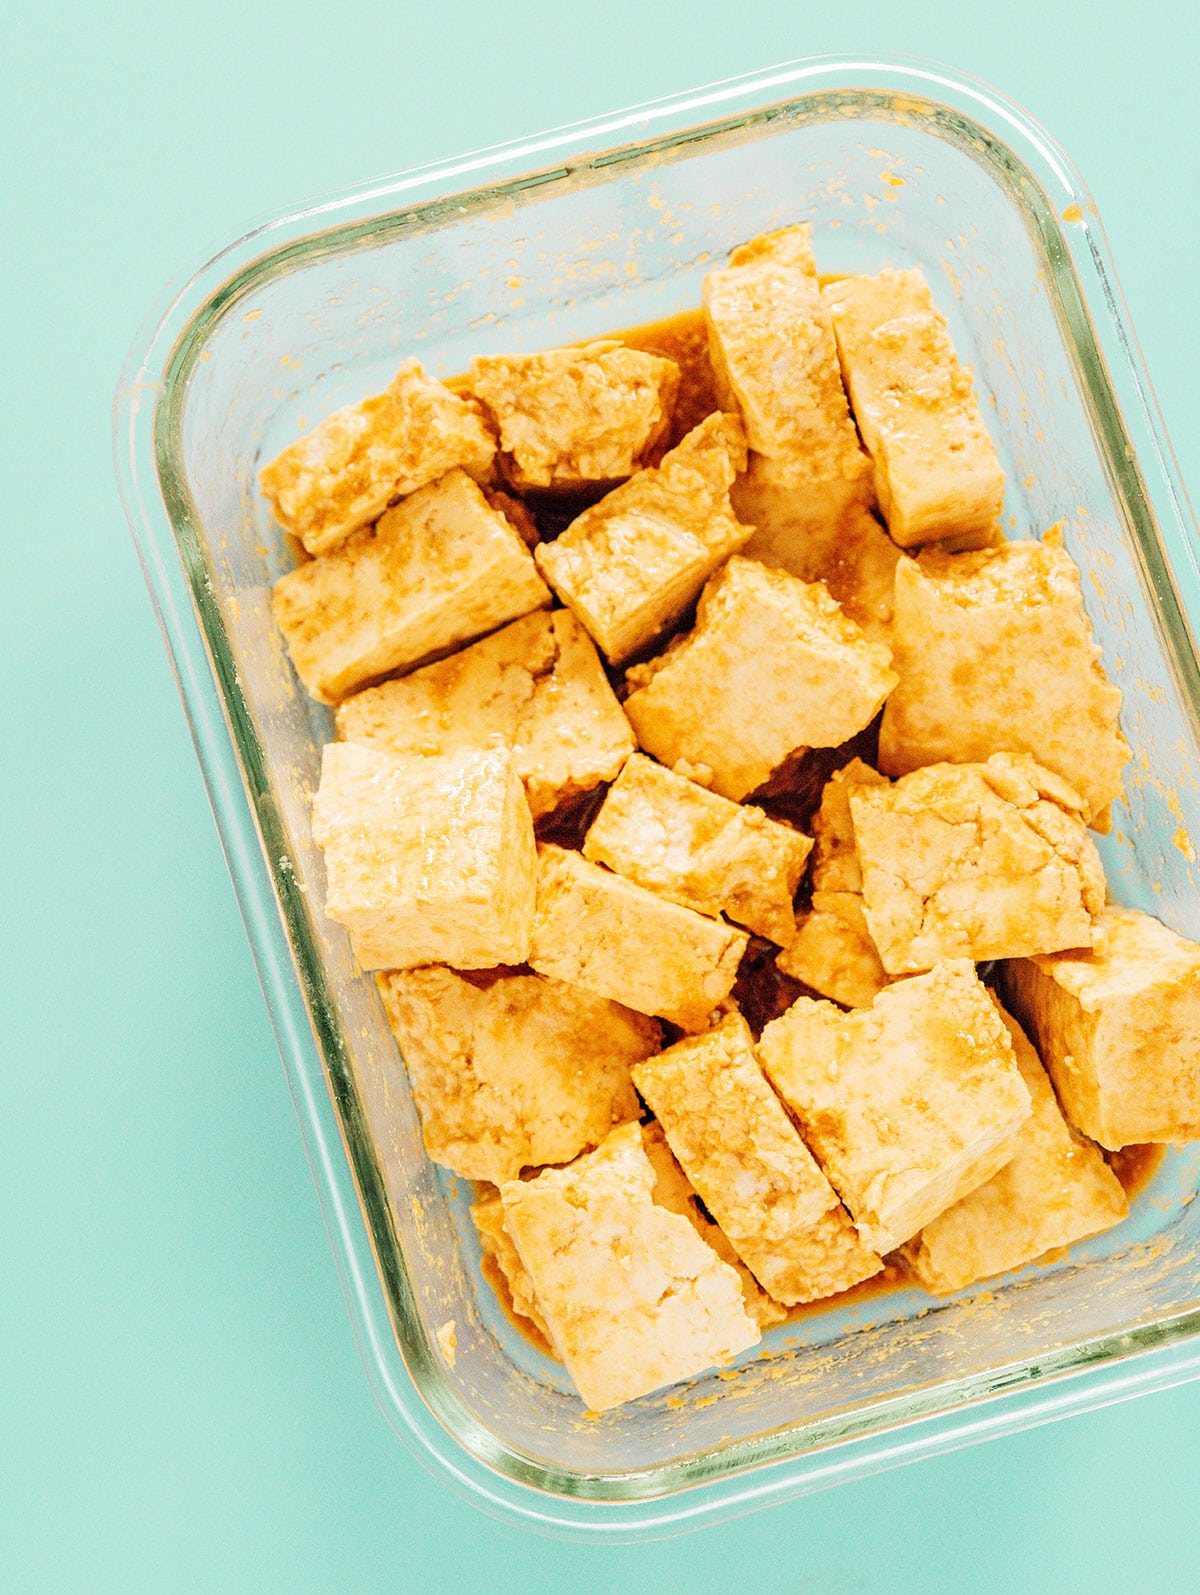 Tofu nuggets marinating in a small glass dish.